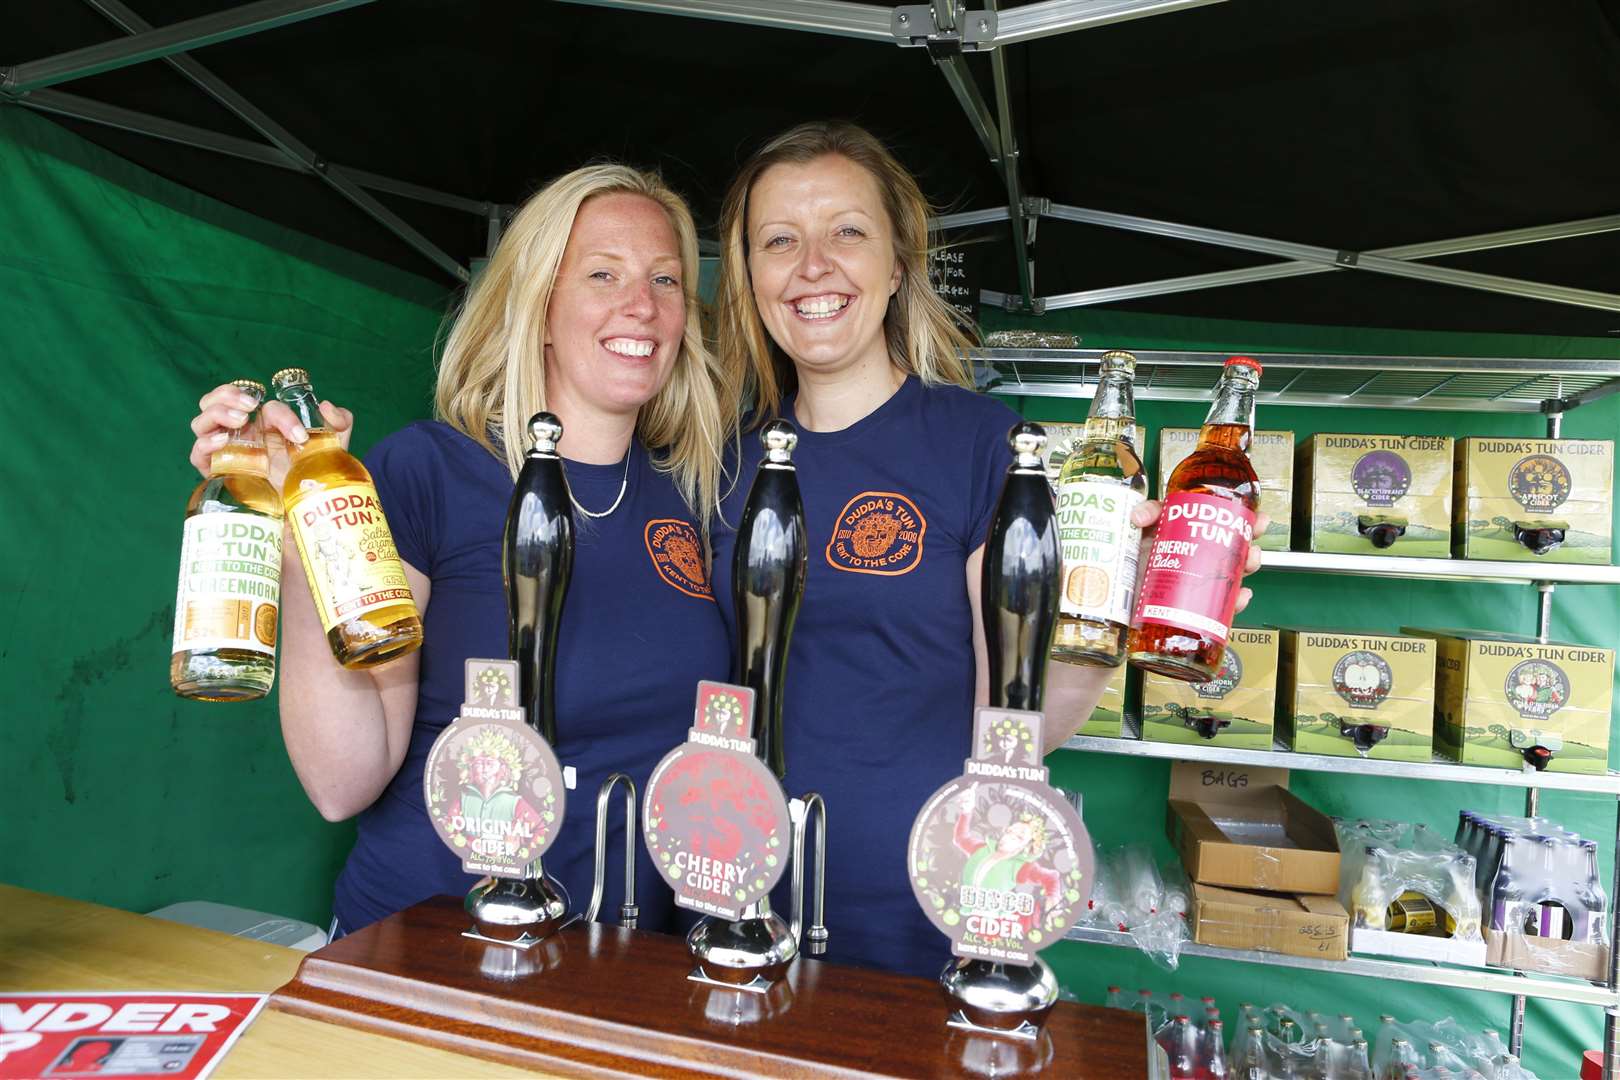 Doddington’s Duddas Tun recently picked up an award for diversifying into cider production